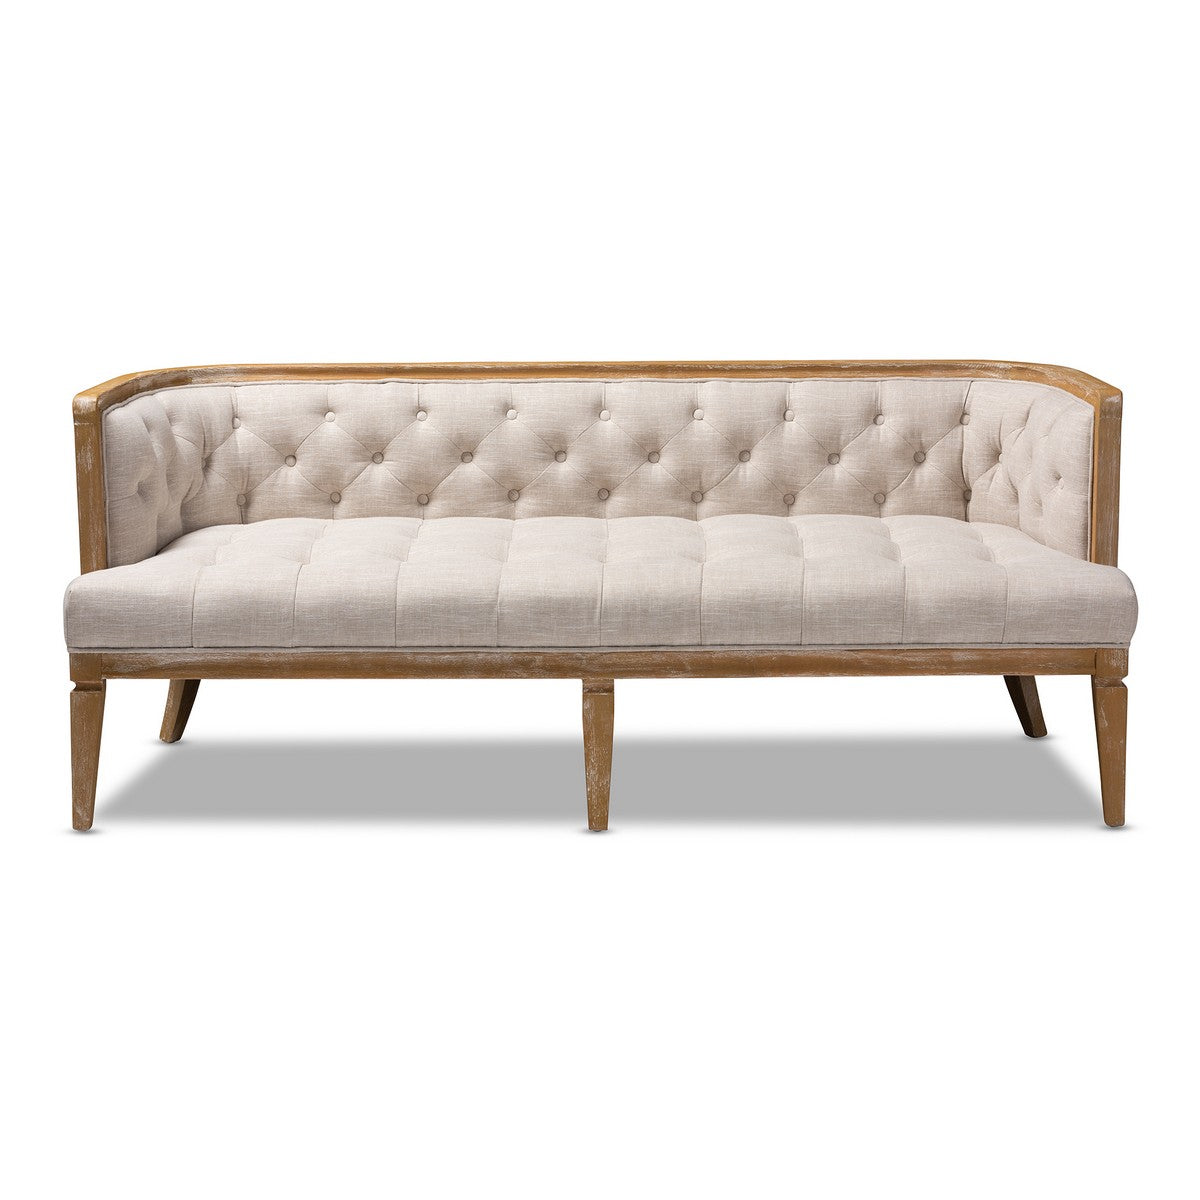 Baxton Studio Agnes French Provincial Beige Linen Fabric Upholstered and White-Washed Oak Wood Sofa